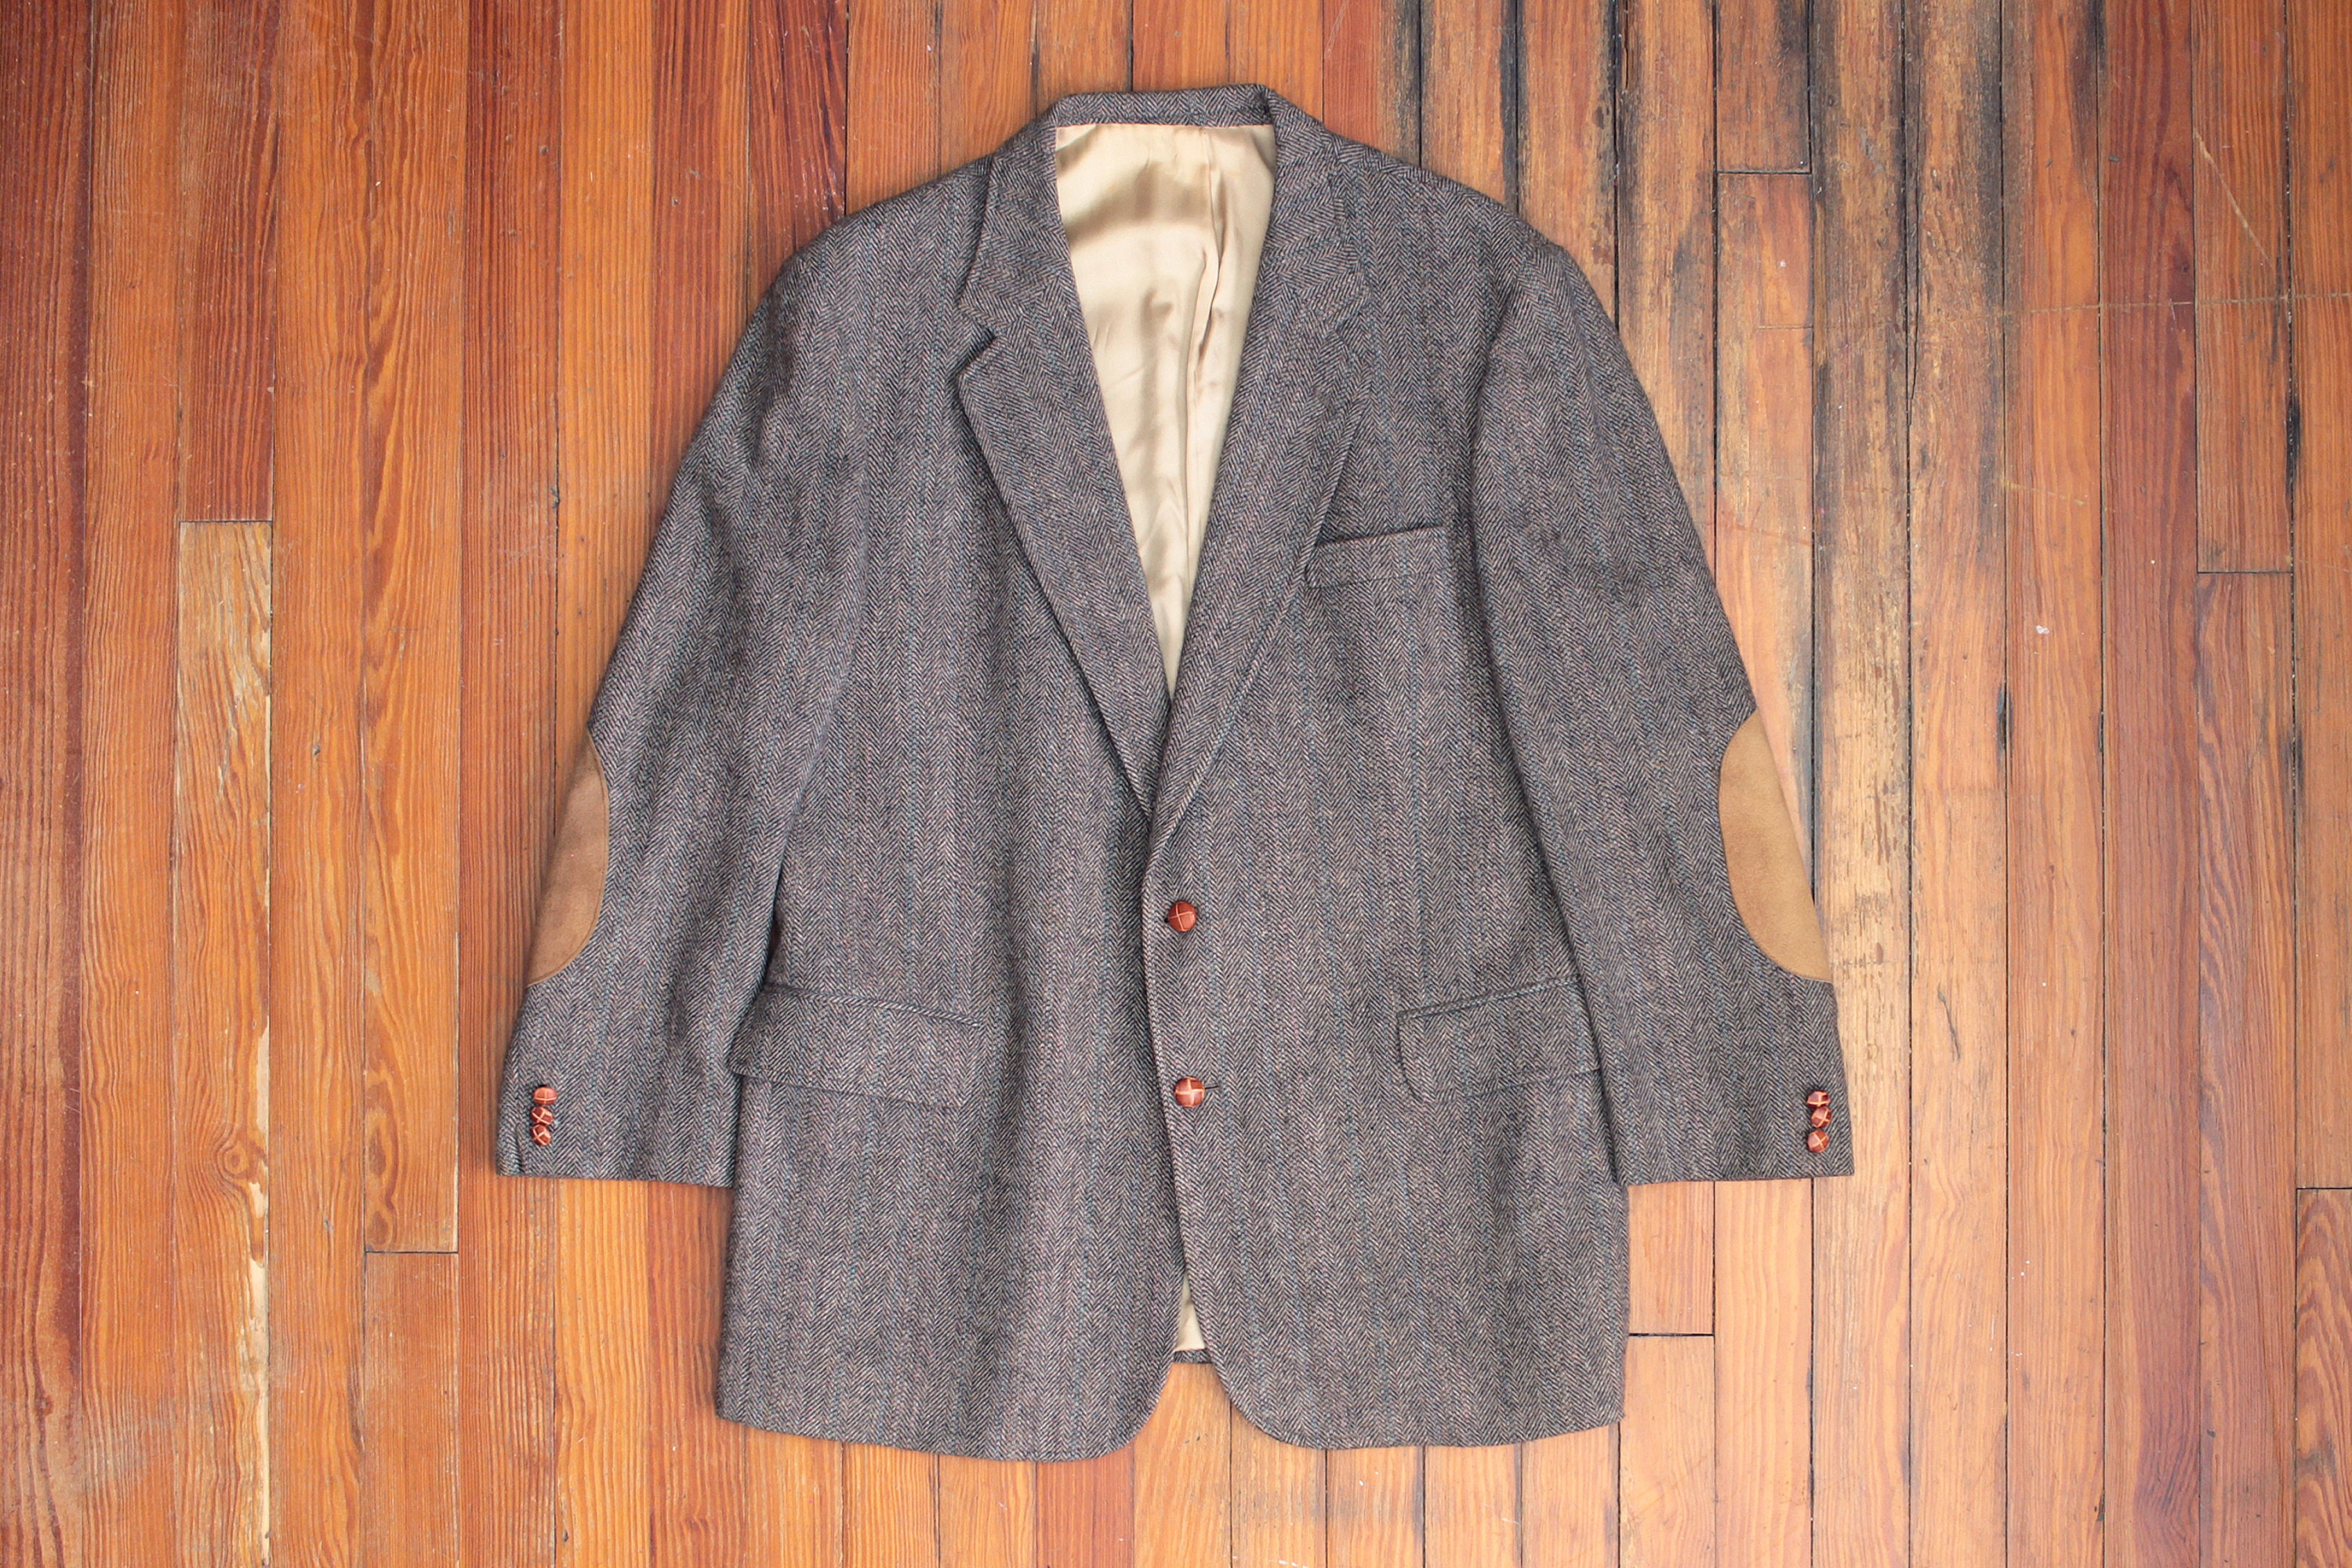 Brown donegal tweed essential Jacket with elbow patches with